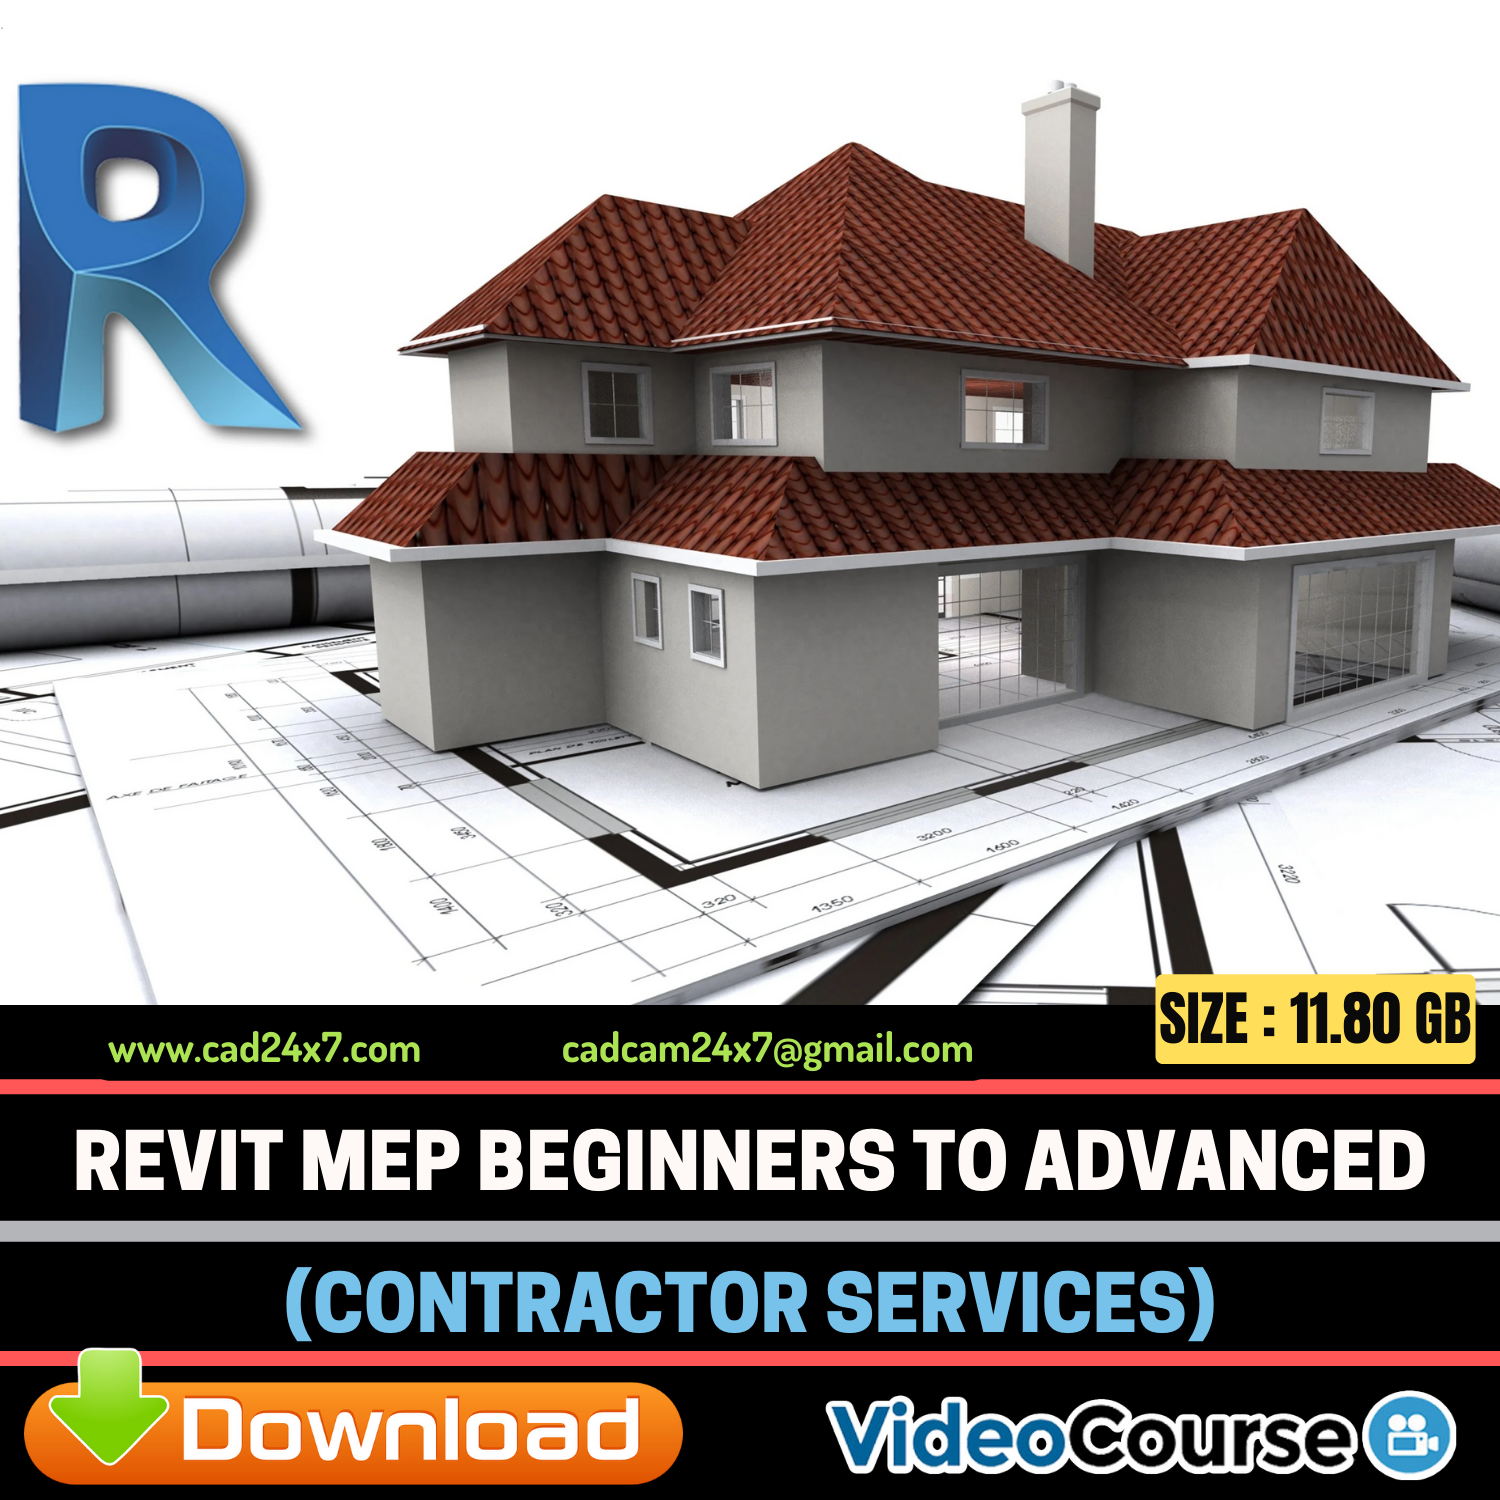 Revit MEP Beginners to Advanced (Contractor Services)